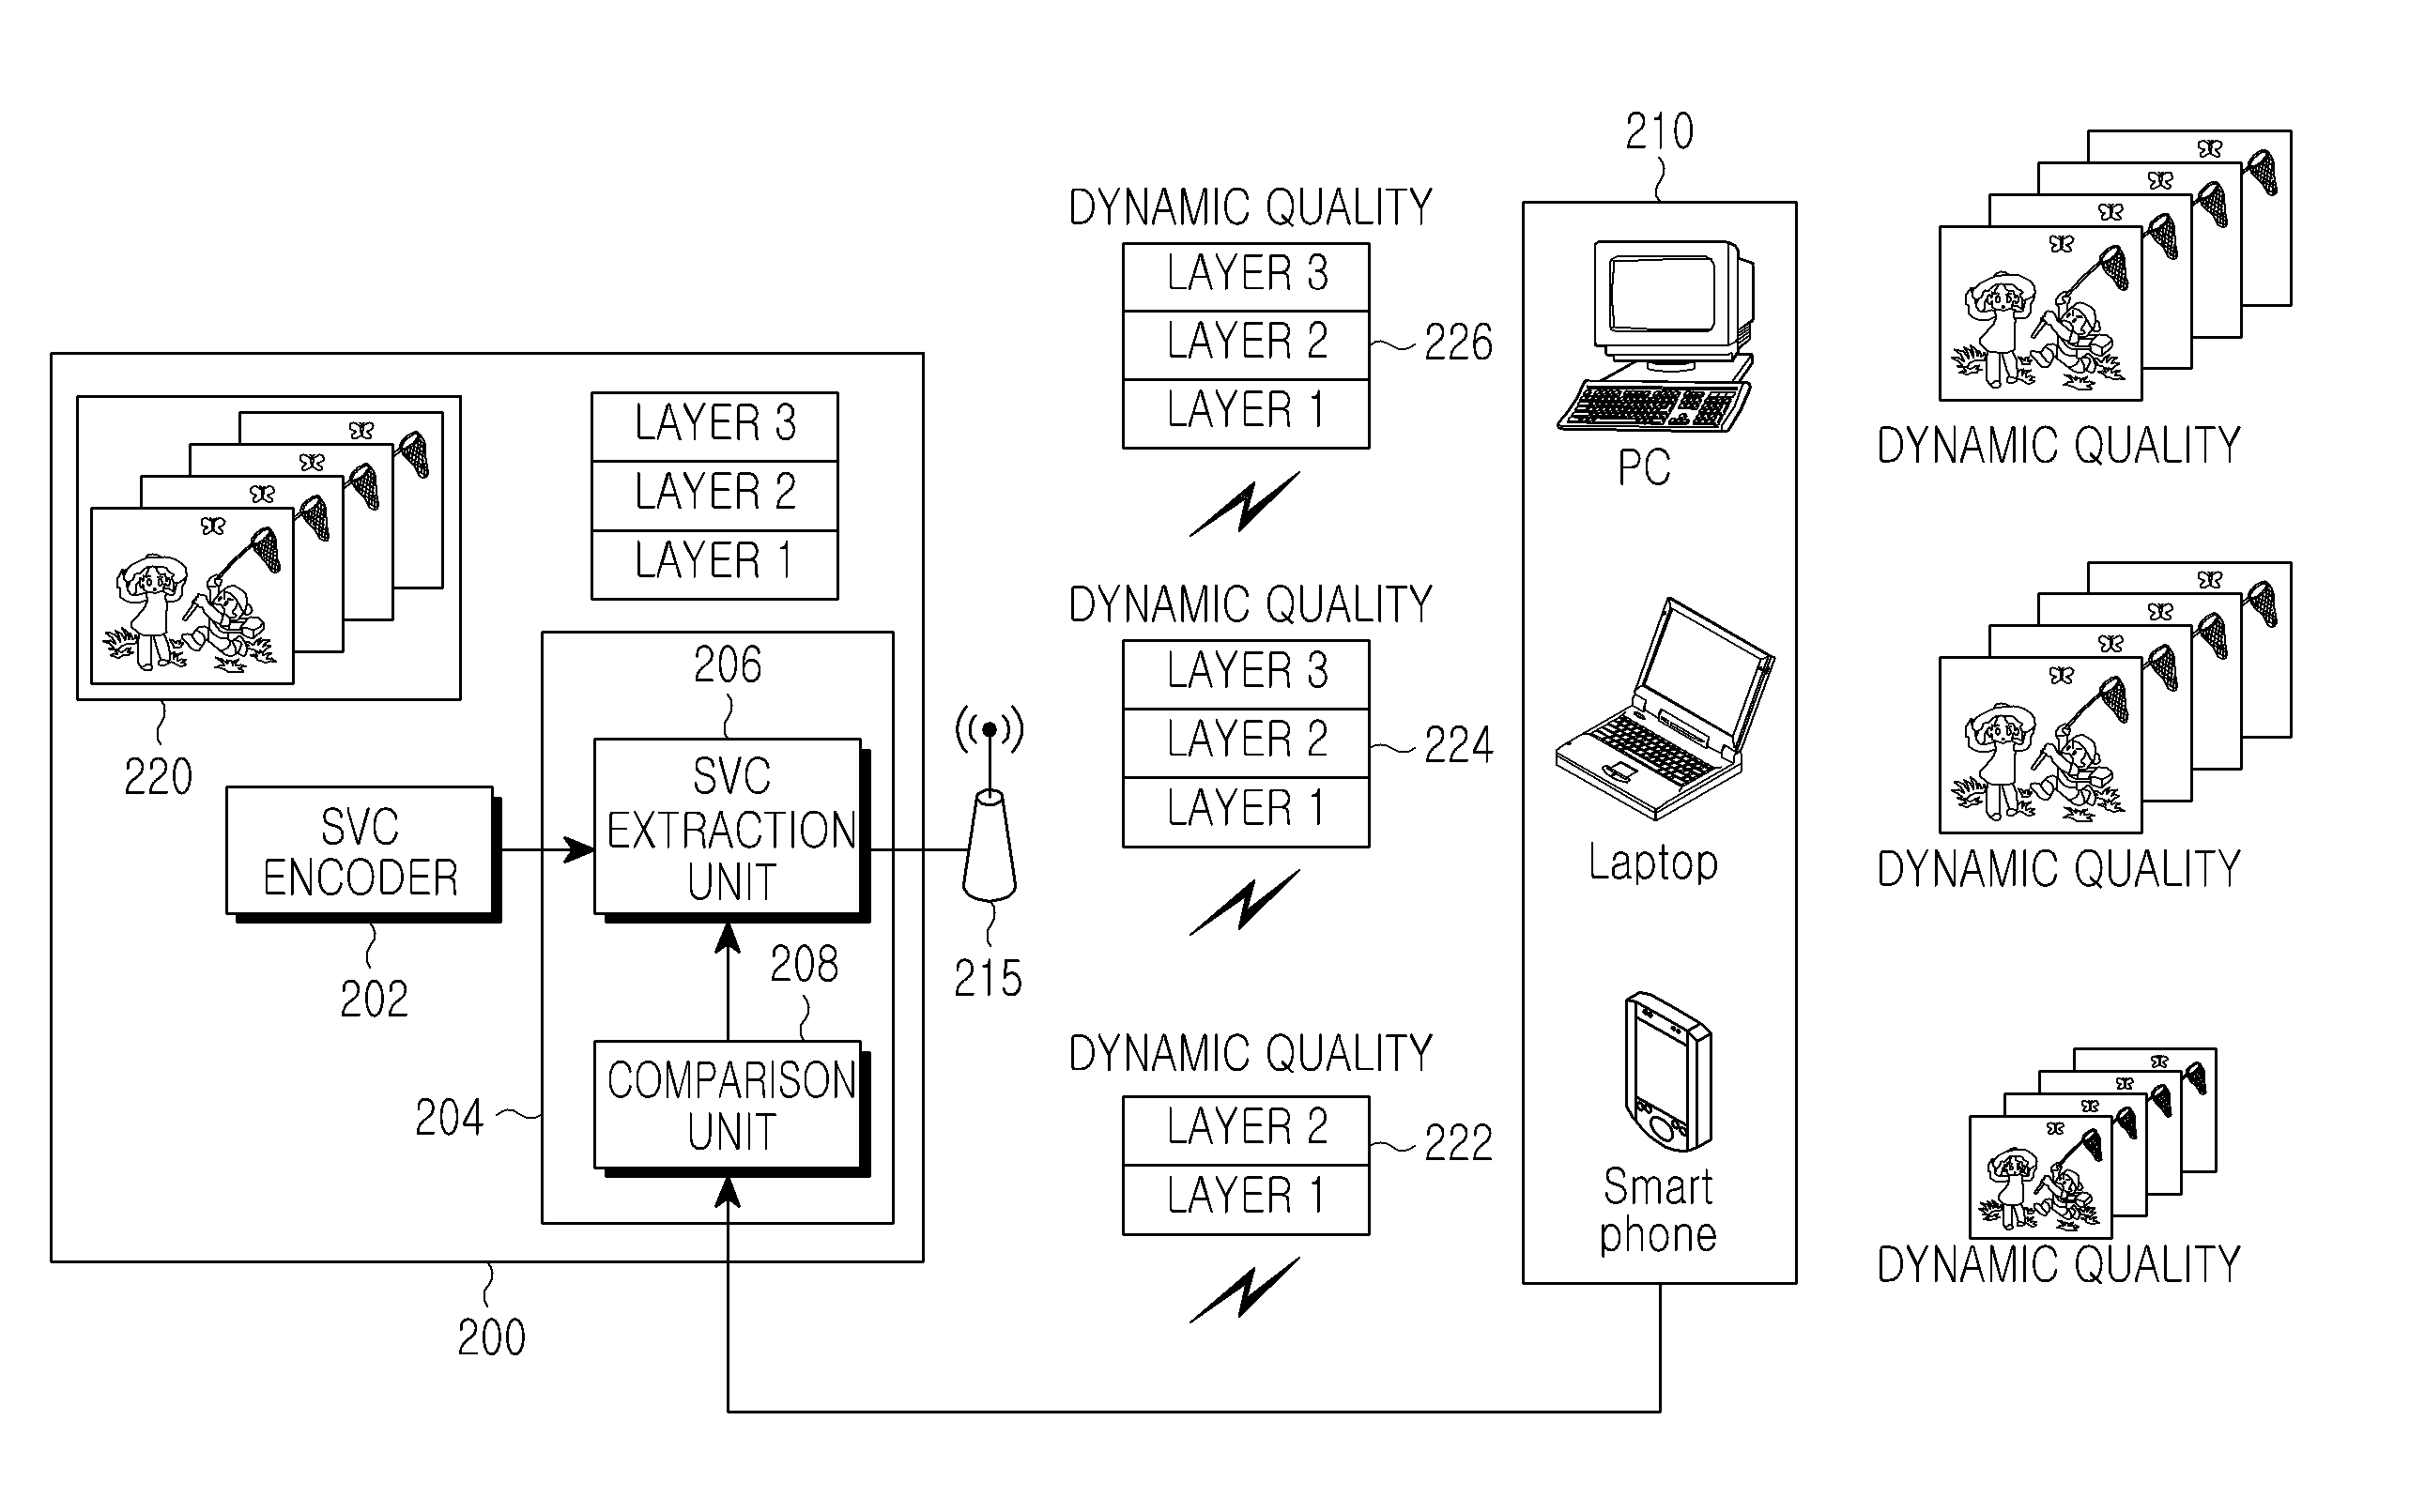 Channel adaptive video transmission method, apparatus using the same, and system providing the same